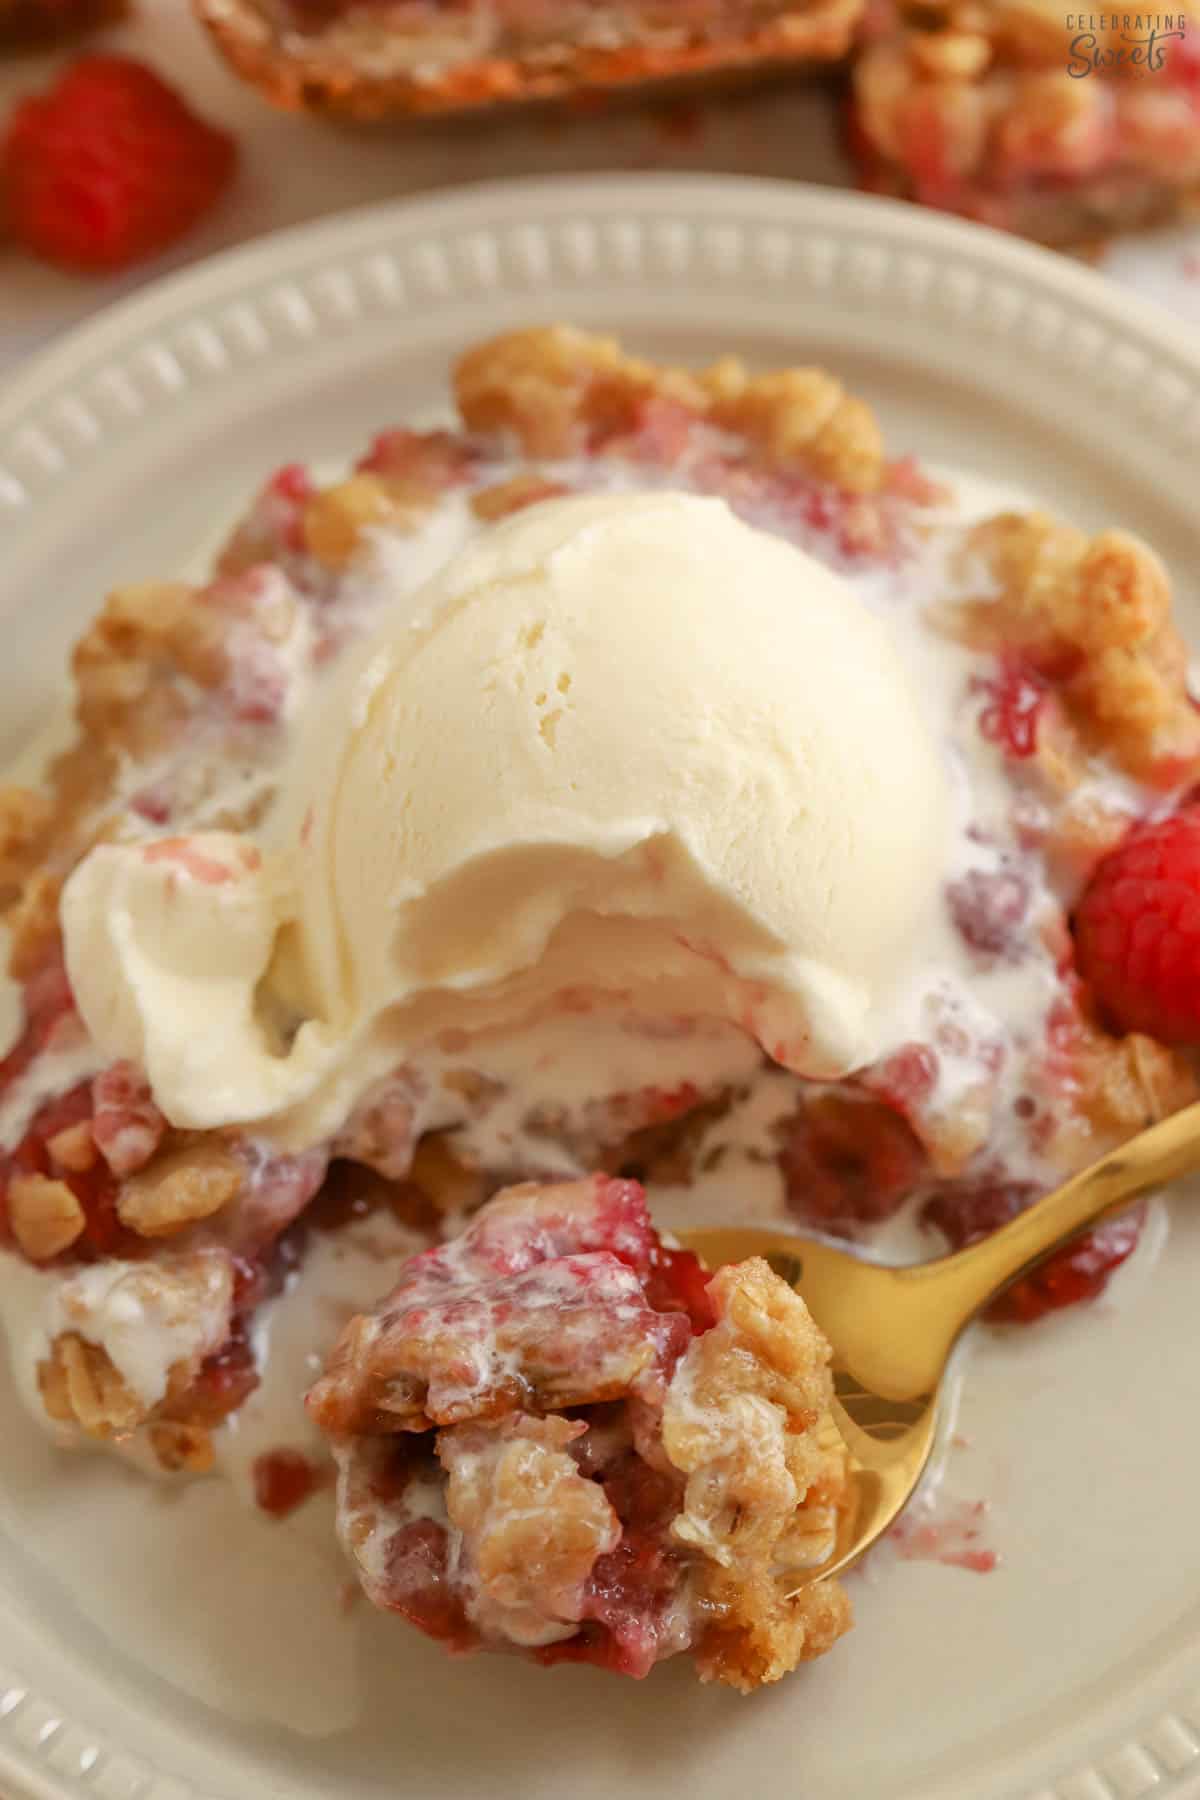 Raspberry bar on a plate topped with vanilla ice cream.